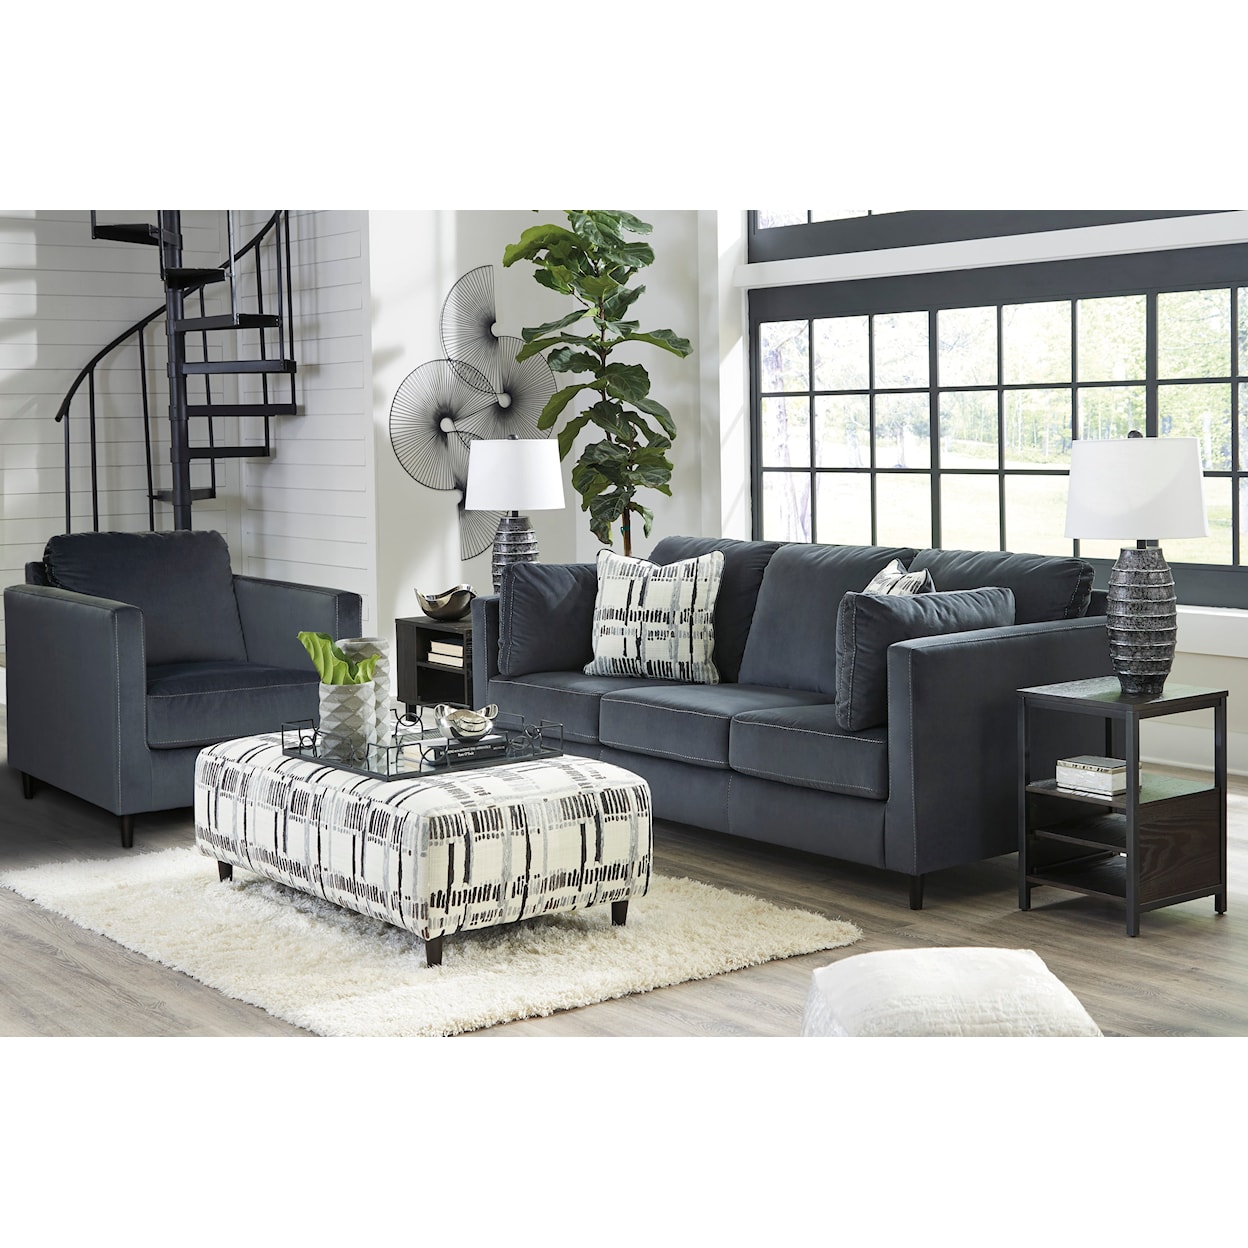 Signature Design by Ashley Kennewick Sofa and Chair Group